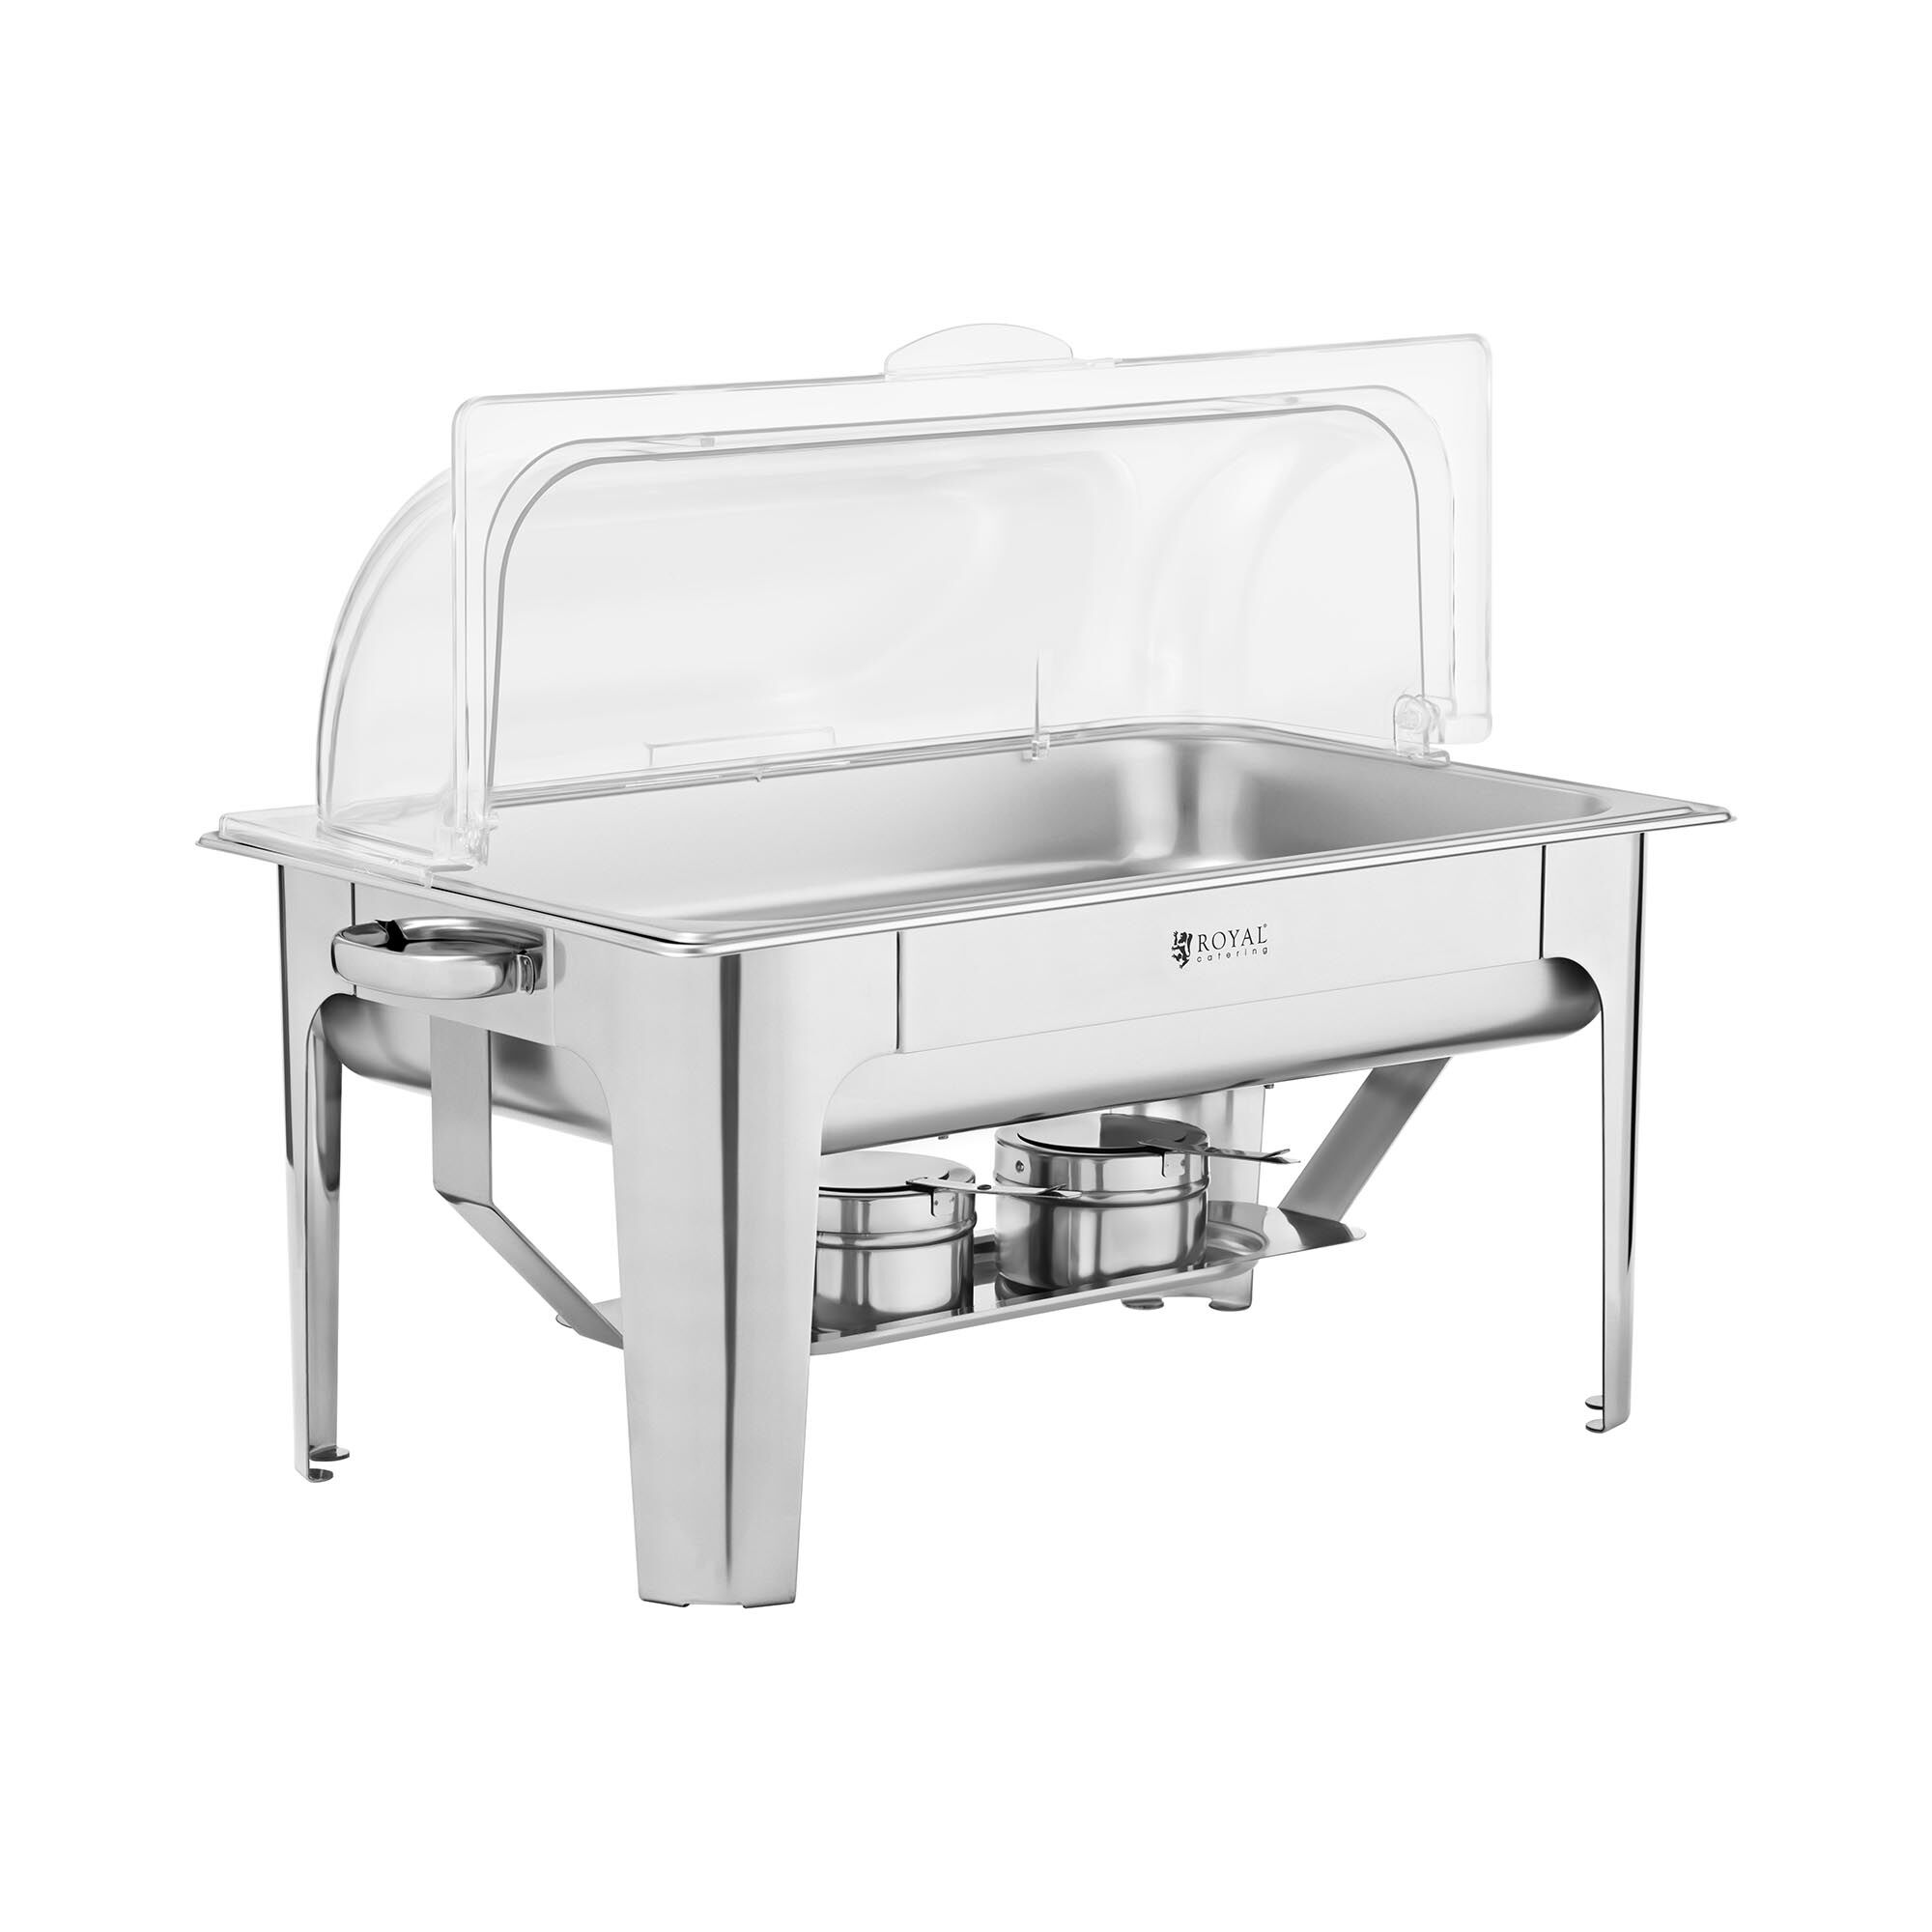 Royal Catering Chafing Dish - GN 1/1 - Royal Catering - 8,5 L - breiter Stand